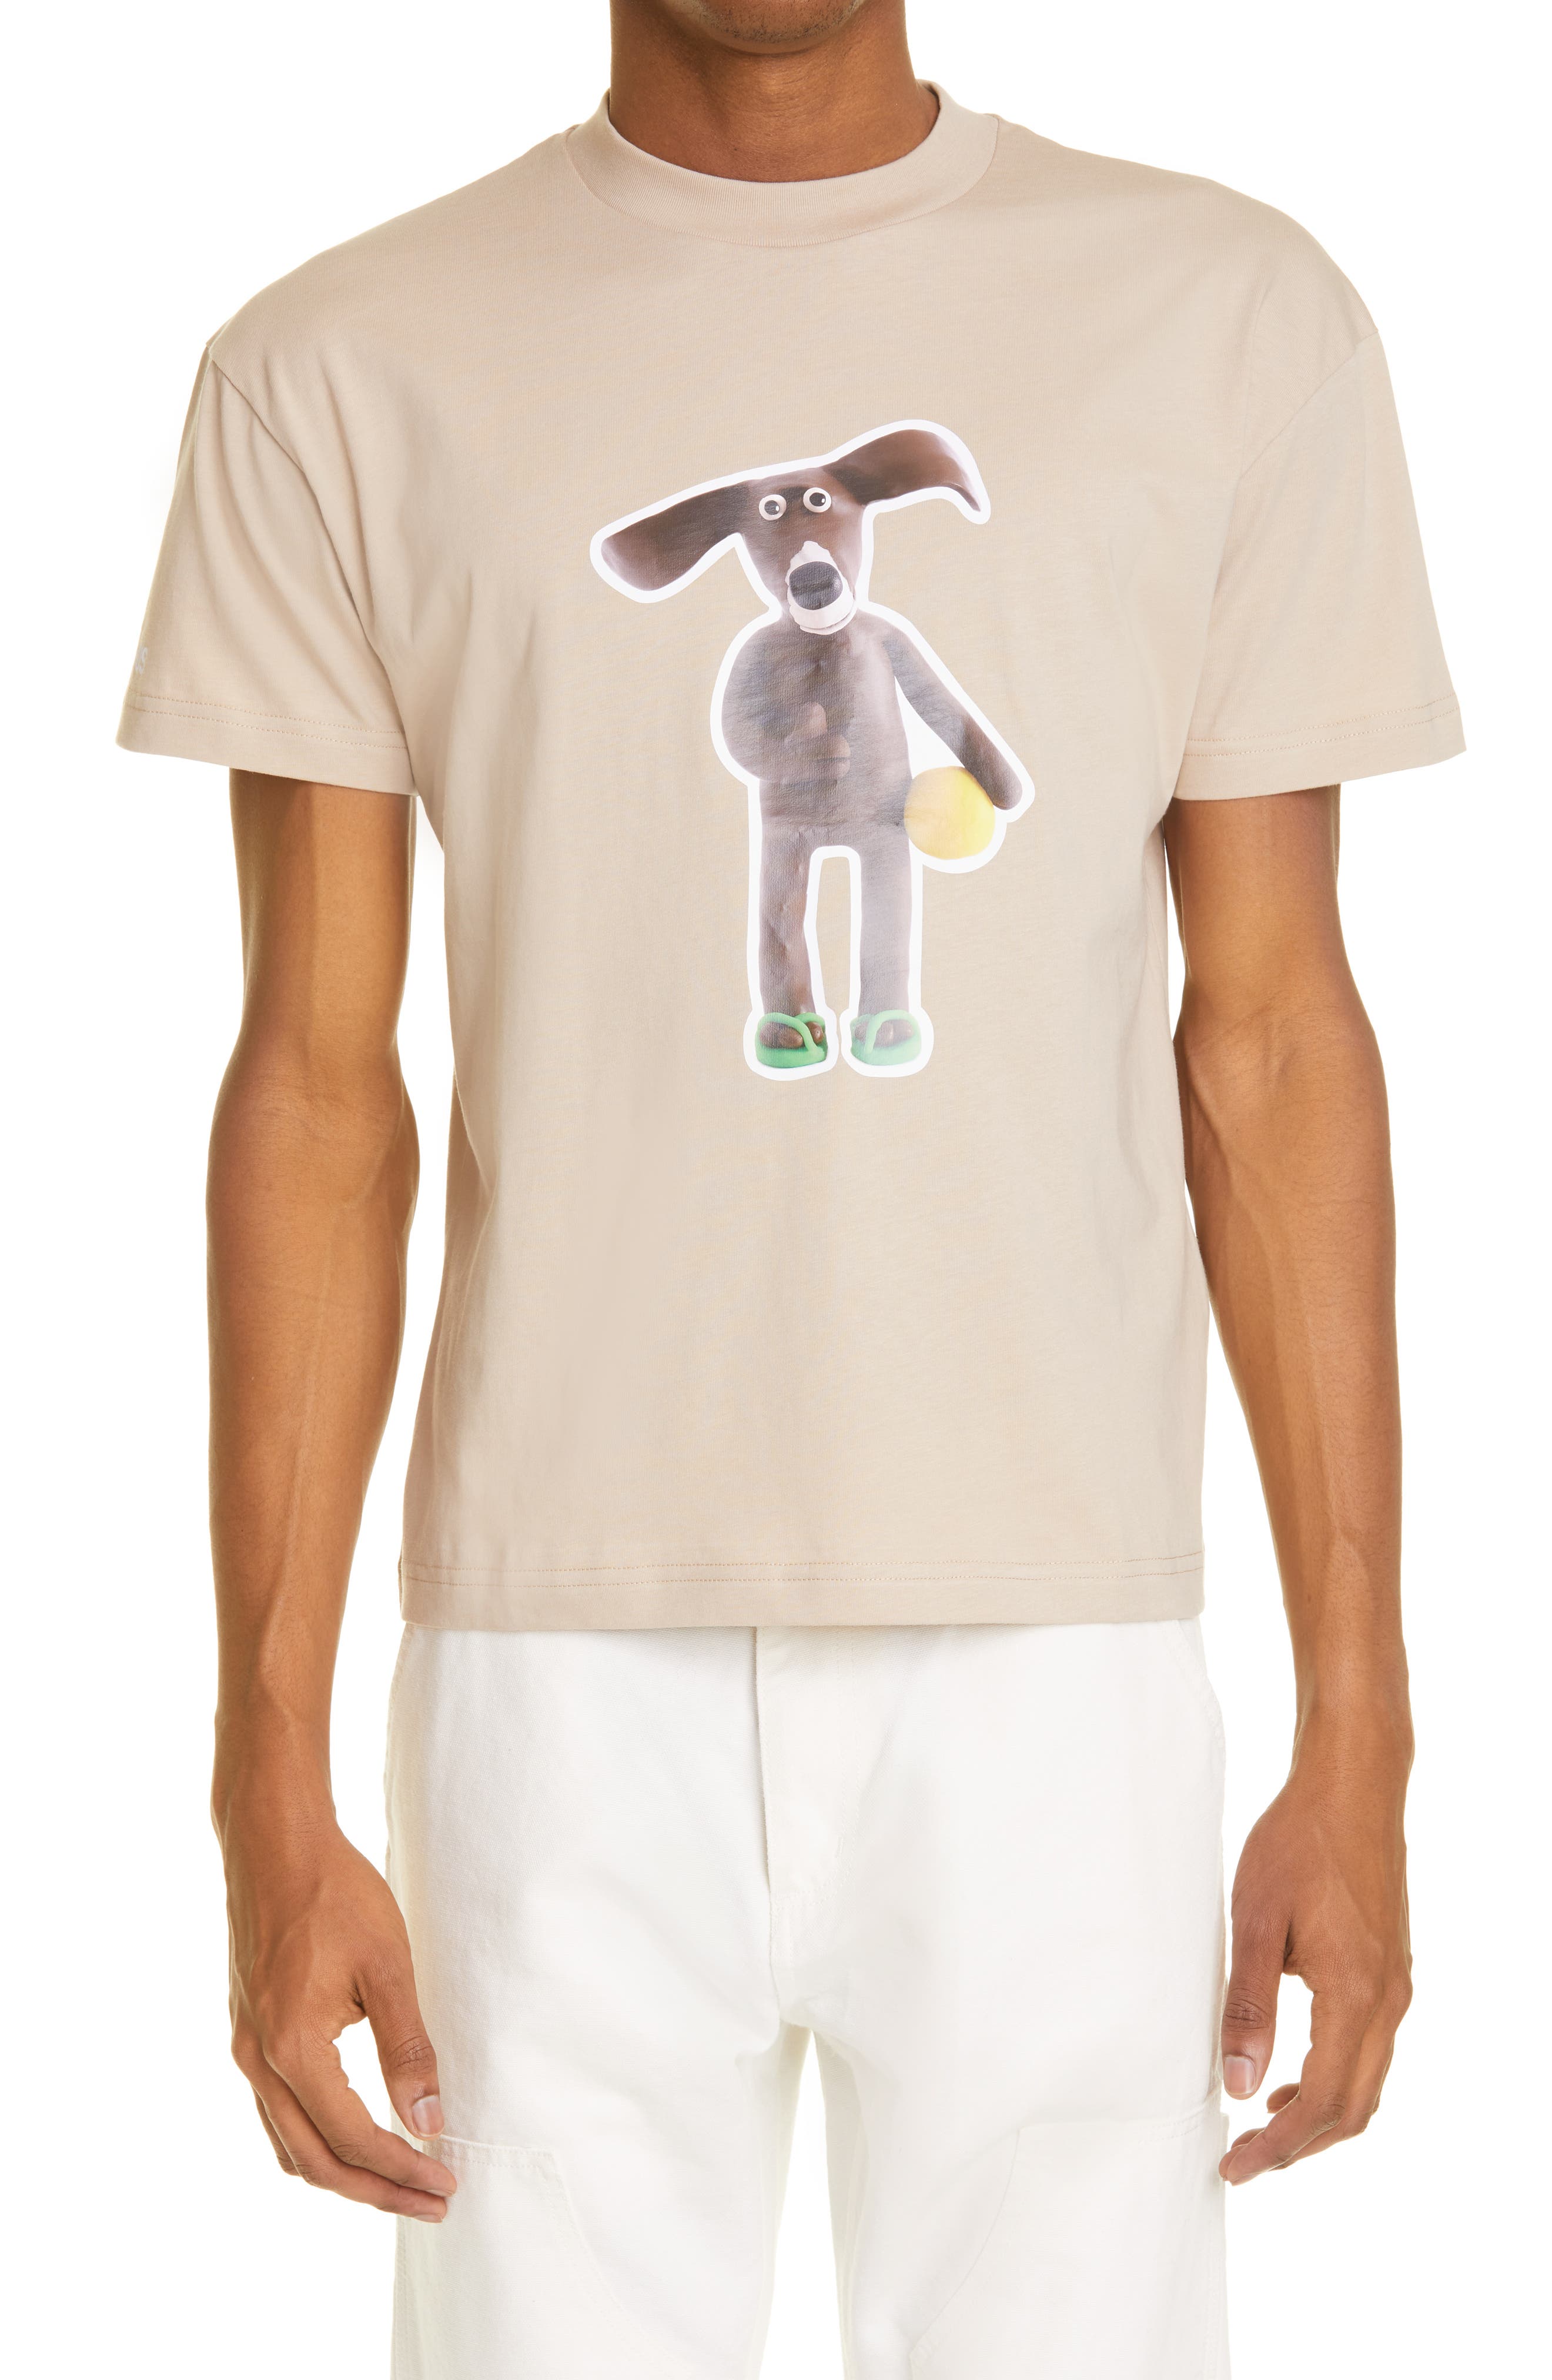 Jacquemus Le T-Shirt Toutou Cotton Graphic Tee in Beige at Nordstrom, Size Small